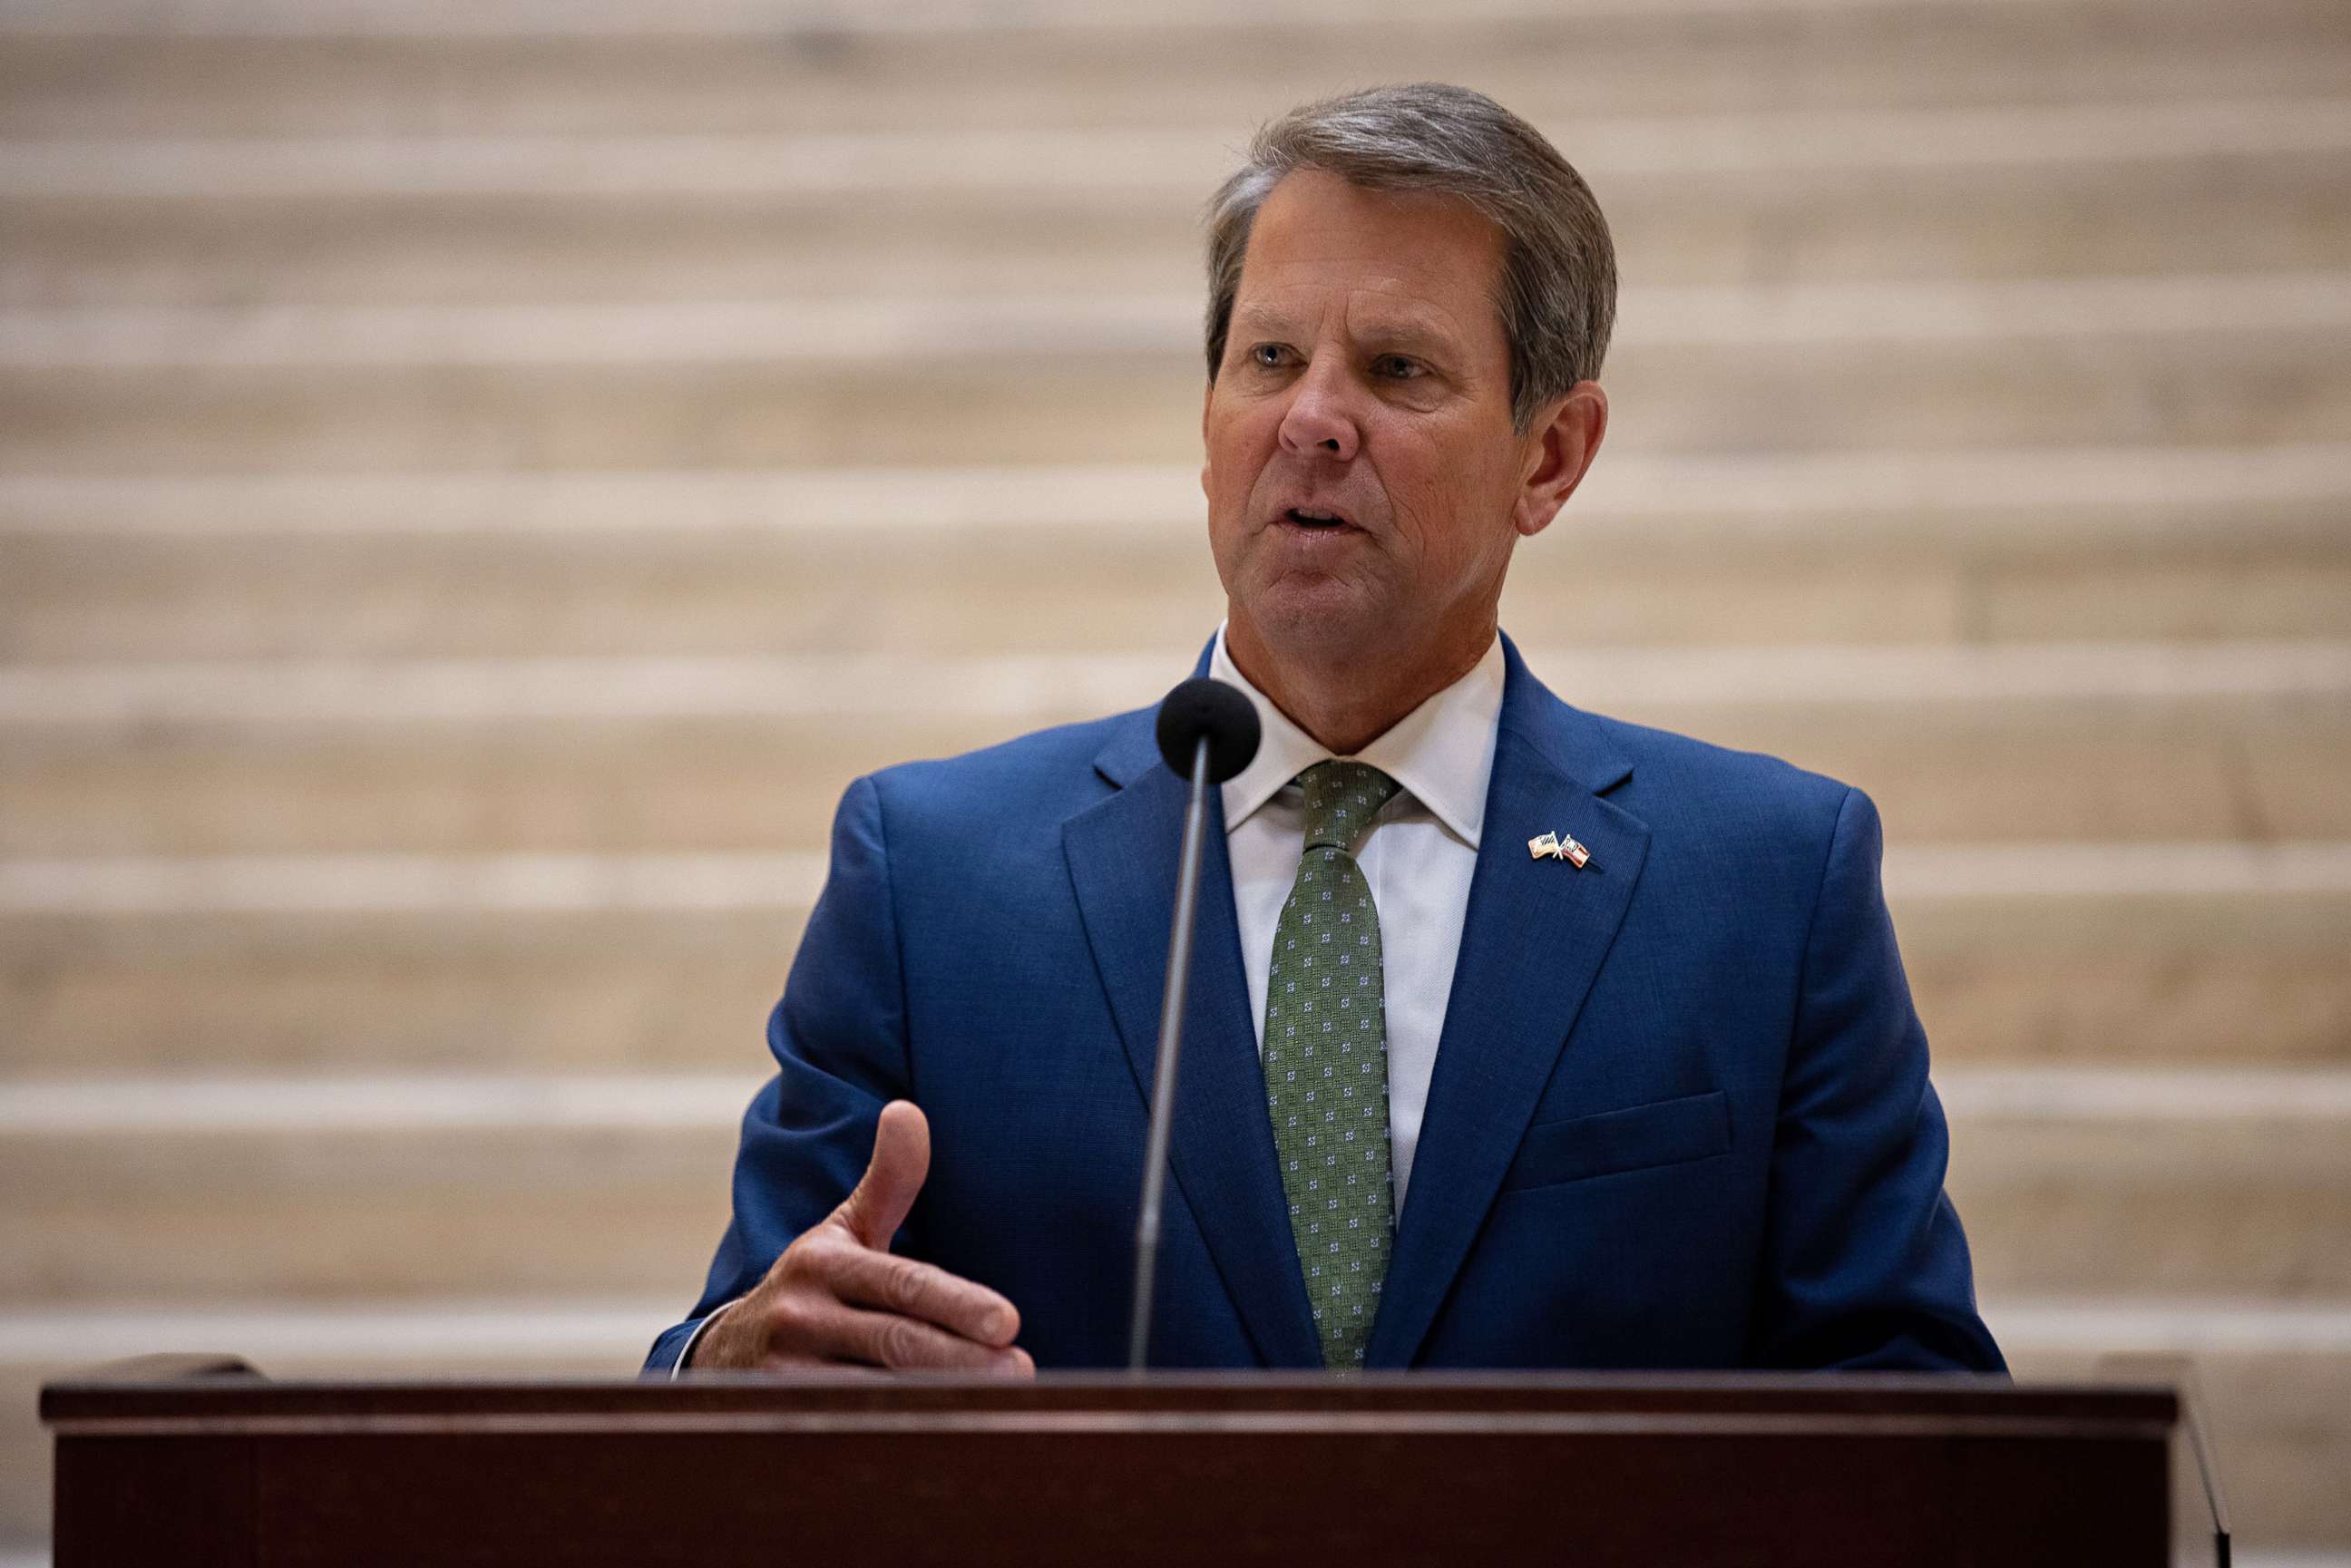 PHOTO: Governor Brian Kemp holds a press conference at the Georgia State Capitol in Atlanta on Human Trafficking in the state, Aug. 19, 2020.